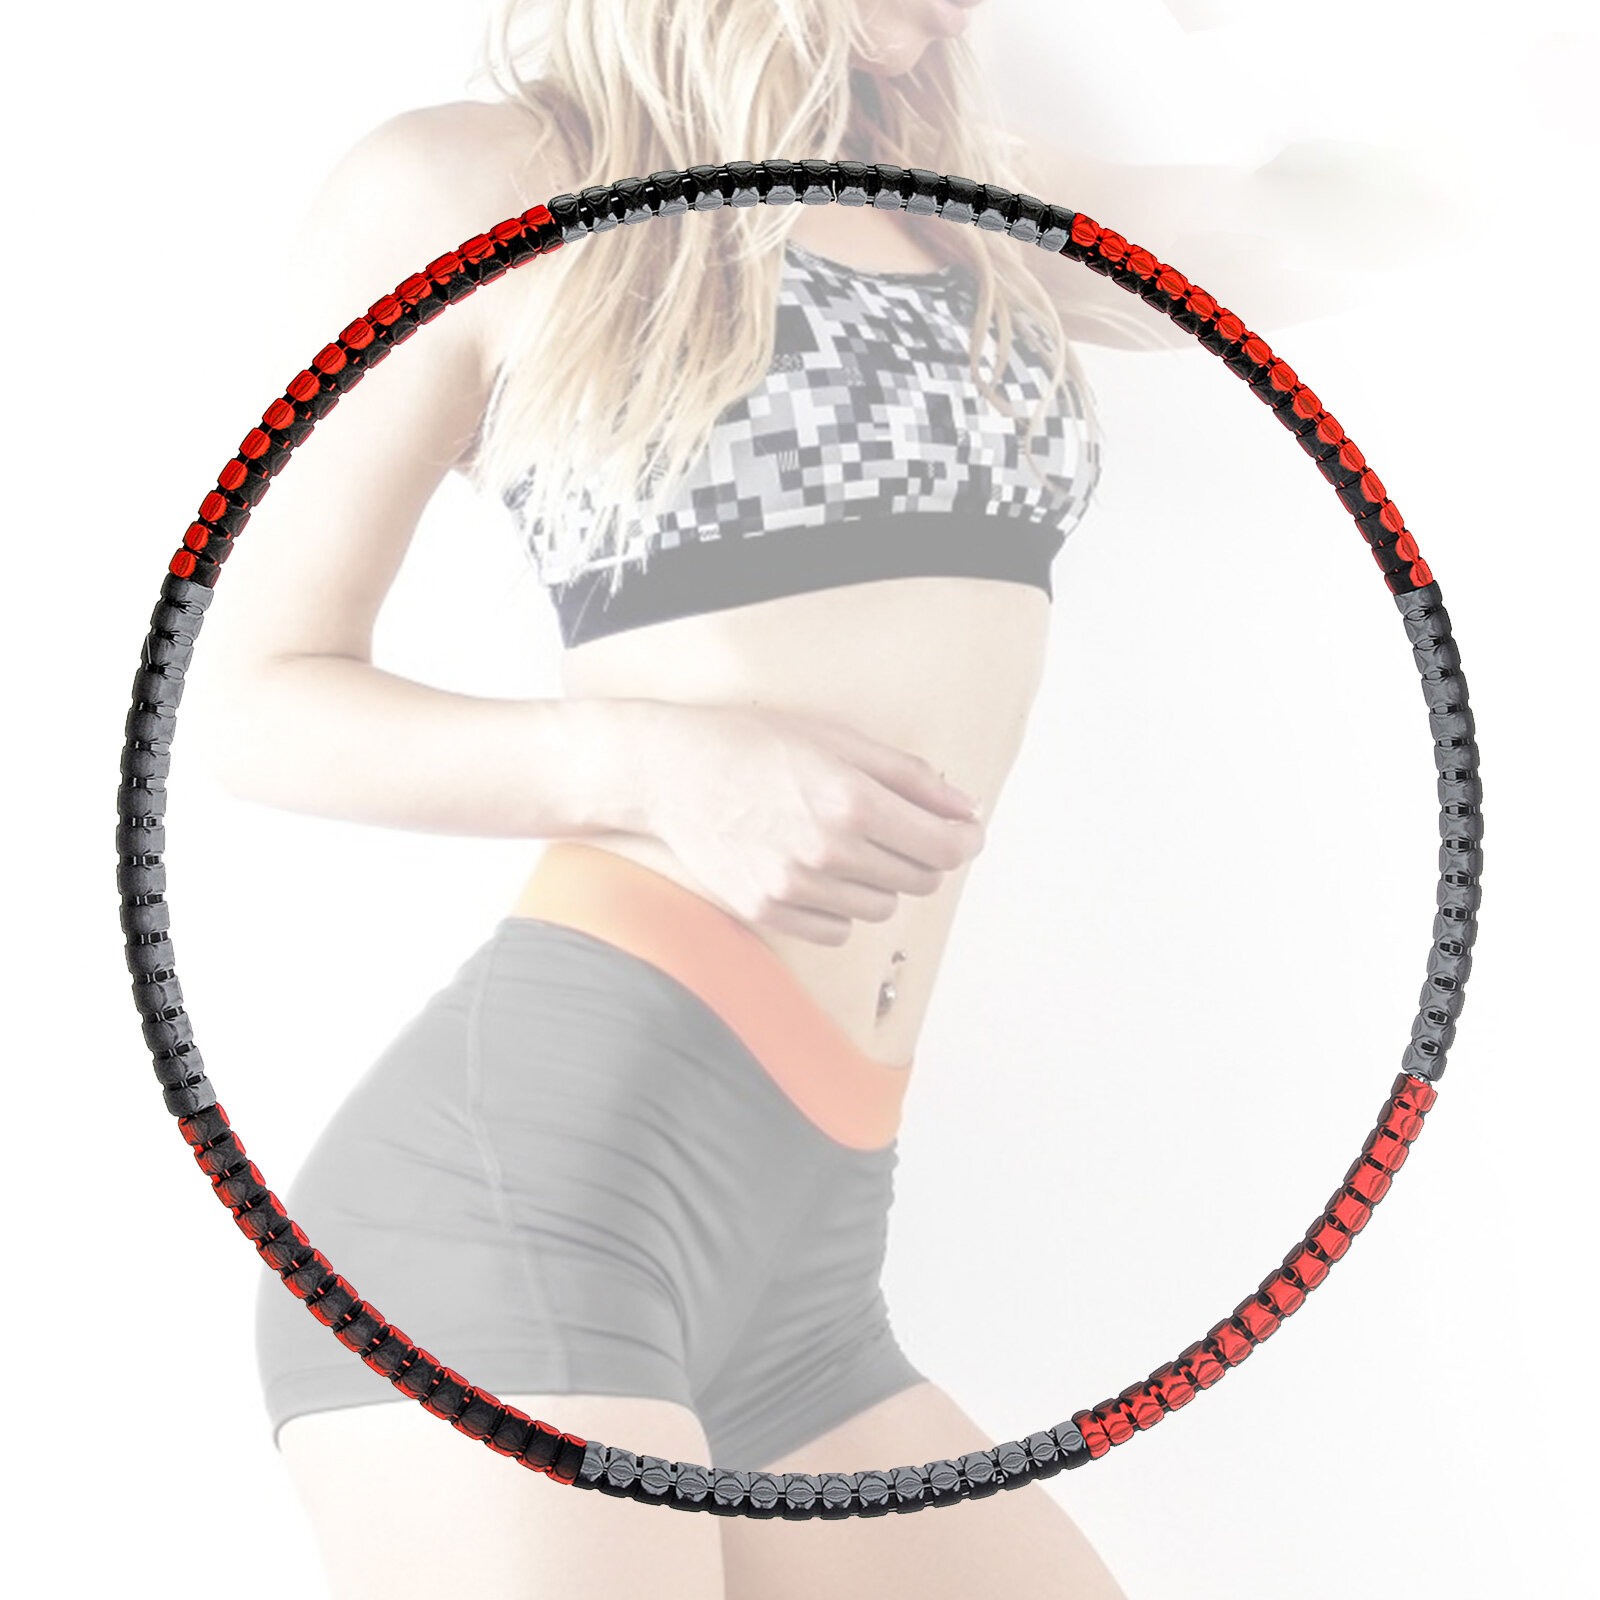 

85cm Fitness Sport Hoops 8 Section Removable Slimming Hoops Exercise Yoga Bodybuilding Equipment Home Gym